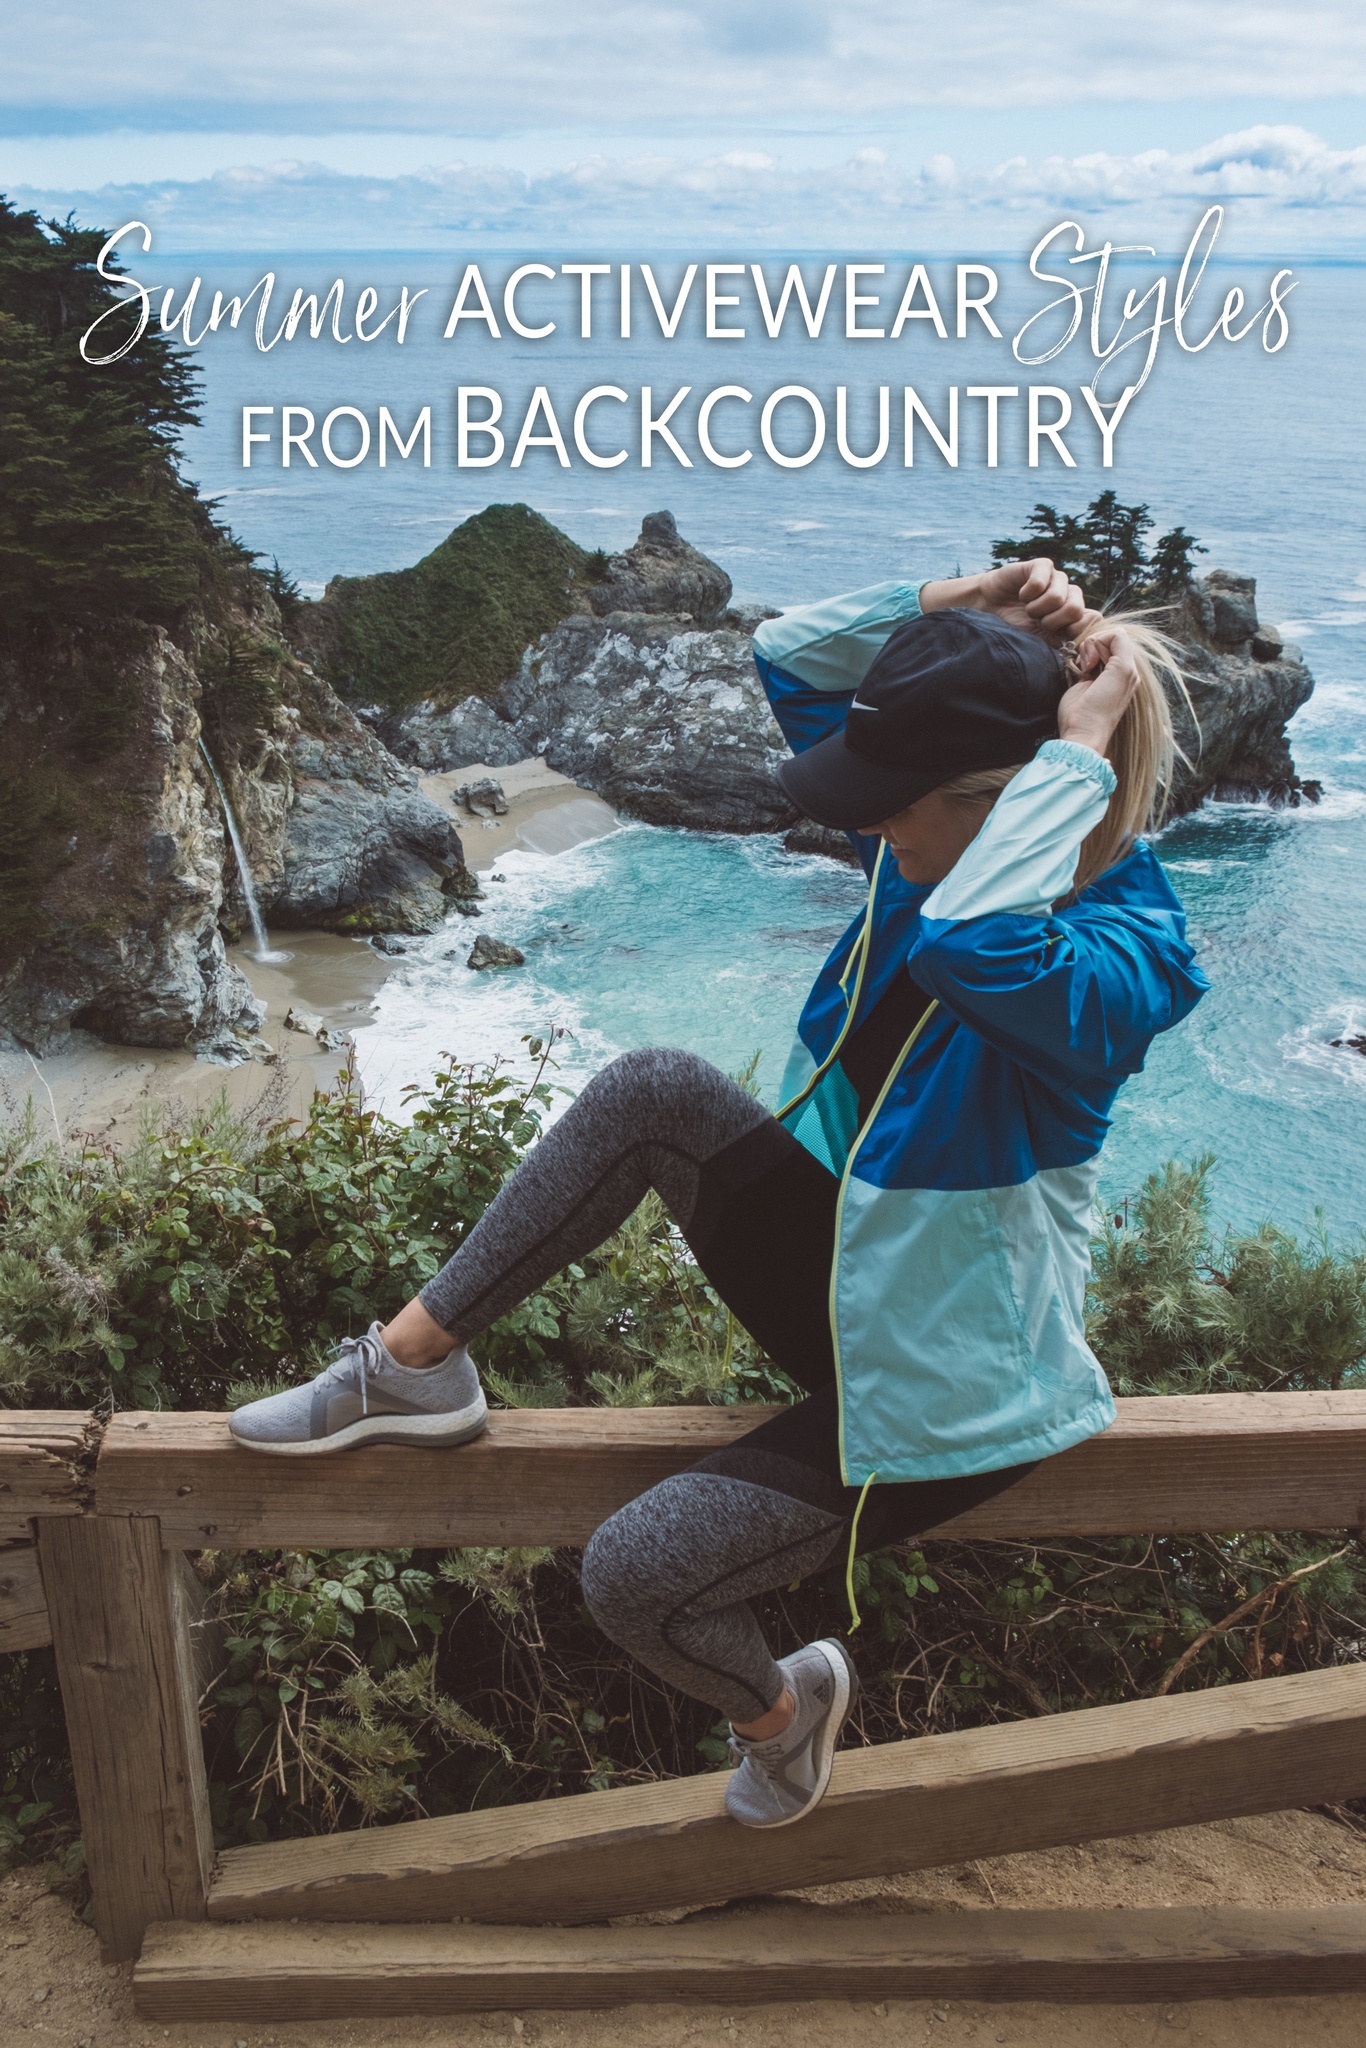 Summer Activewear Styles from Backcountry